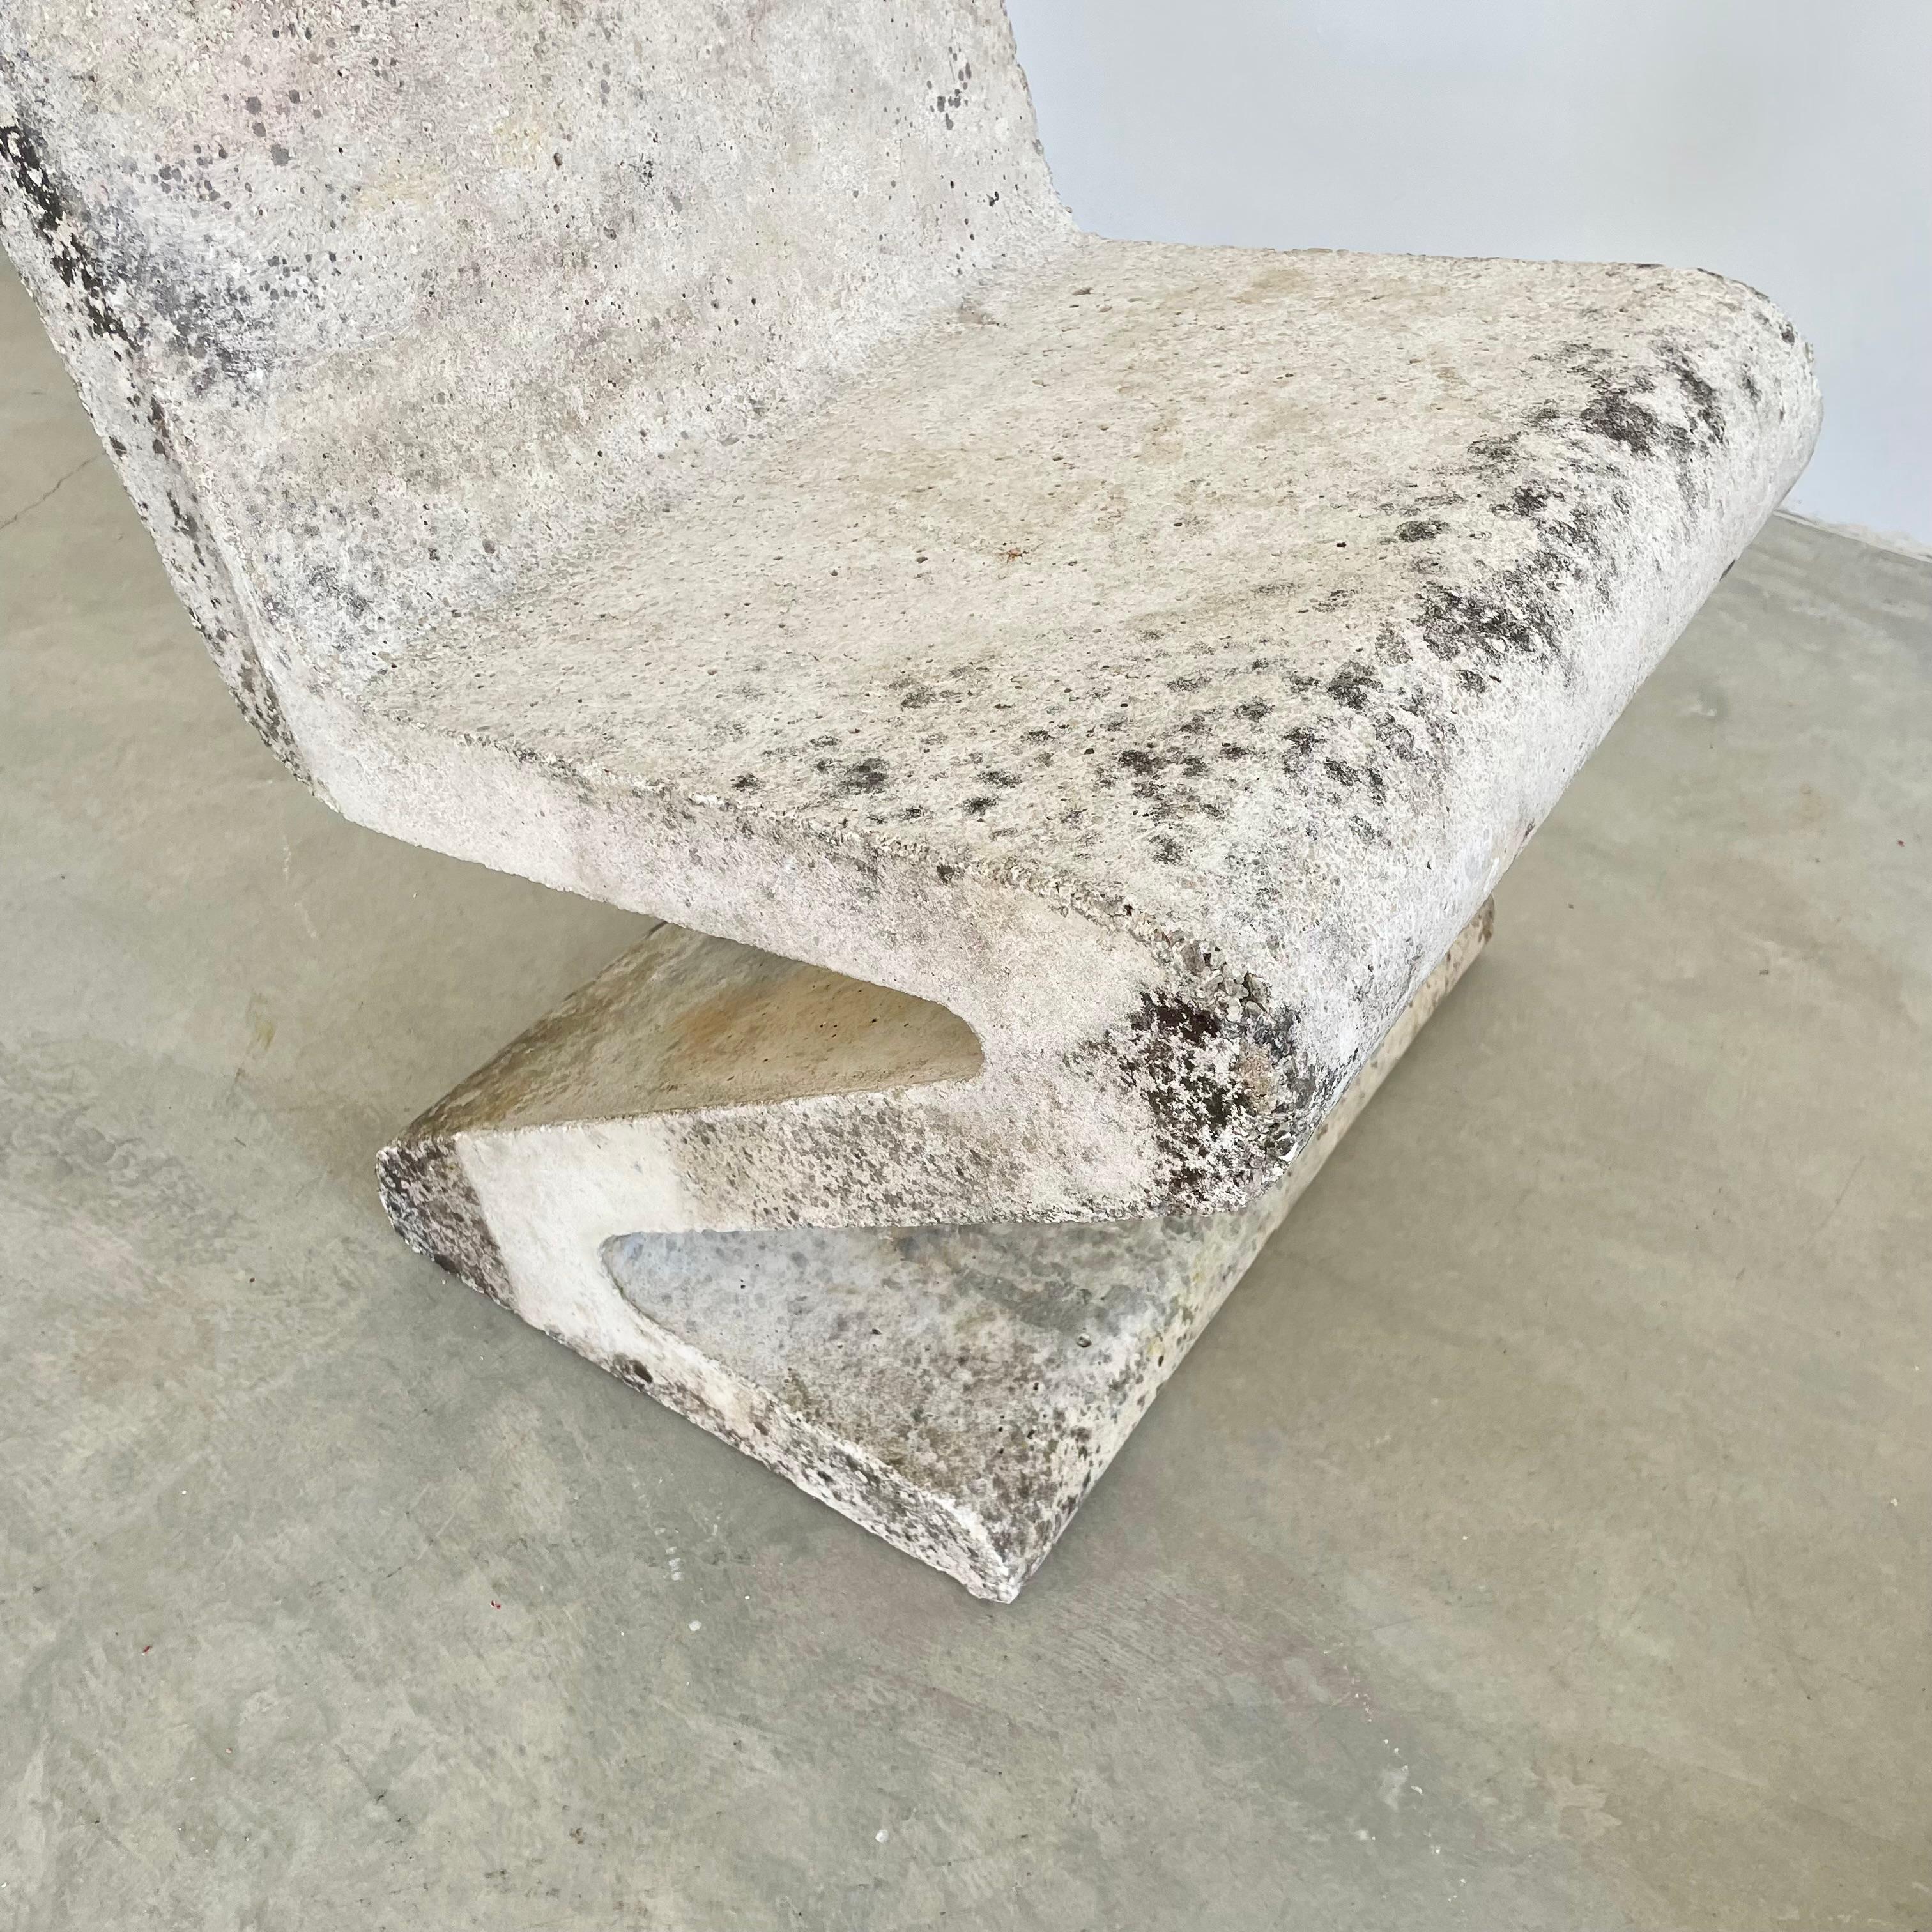 Sculptural Concrete Zig Zag Chair and Table, 1960s Switzerland 2